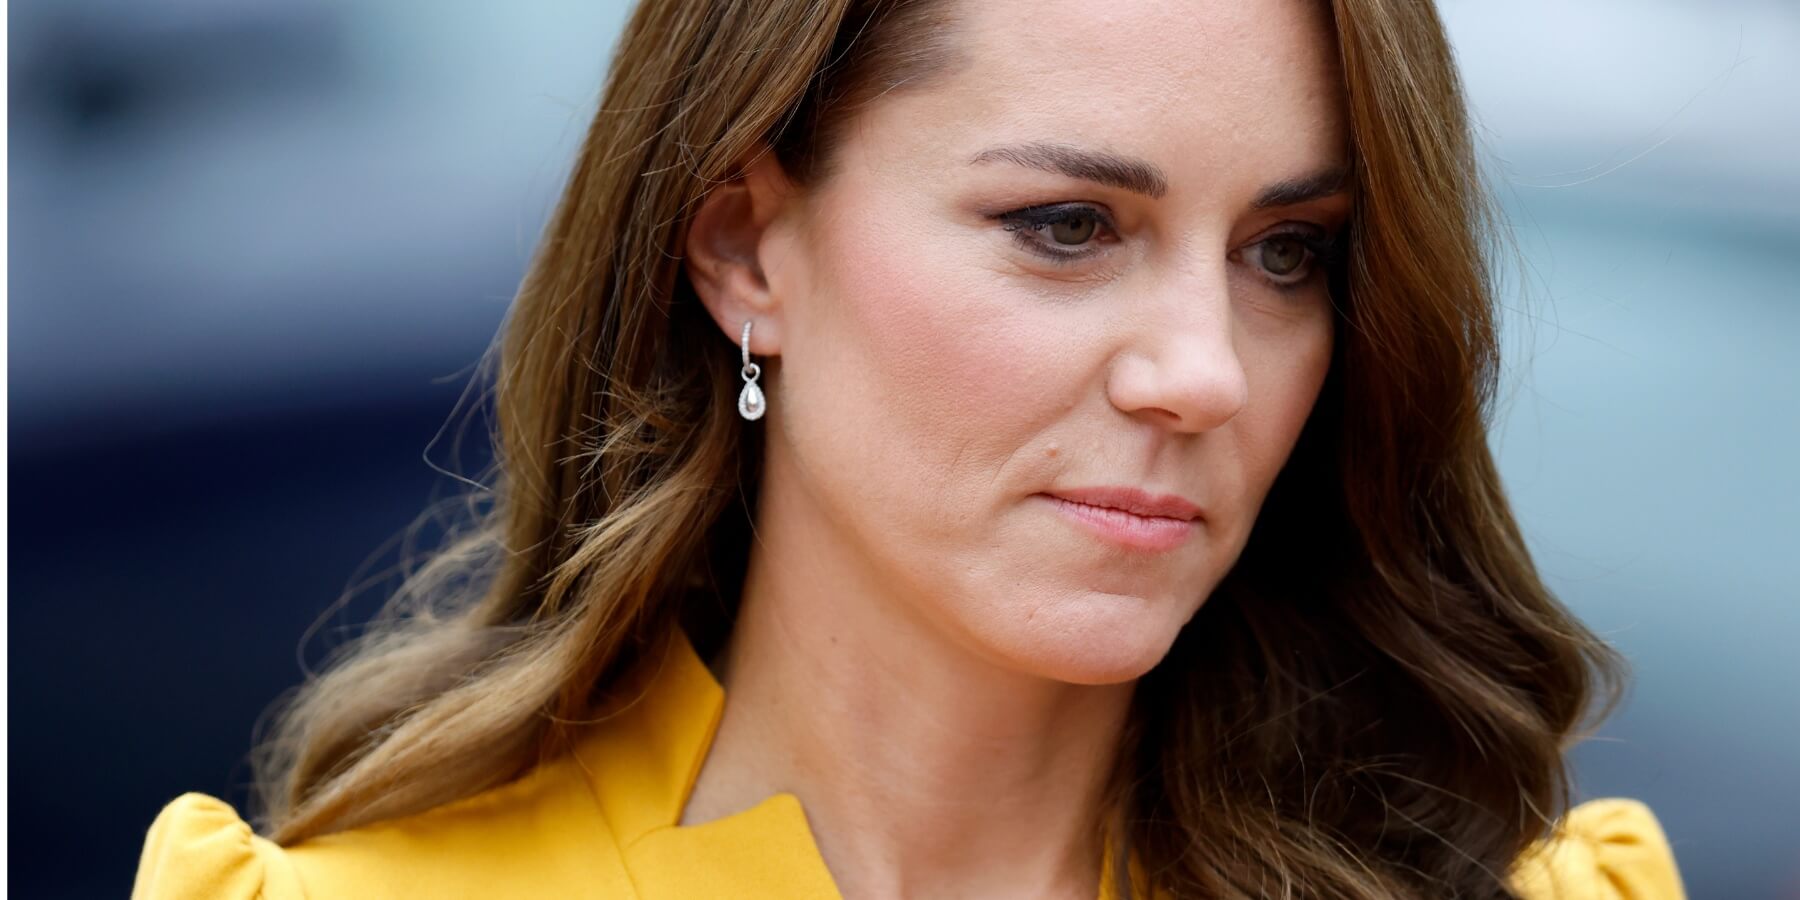 Kate Middleton’s Cancer Diagnosis Treated Like An Episode of ‘The Crown’: Commentator